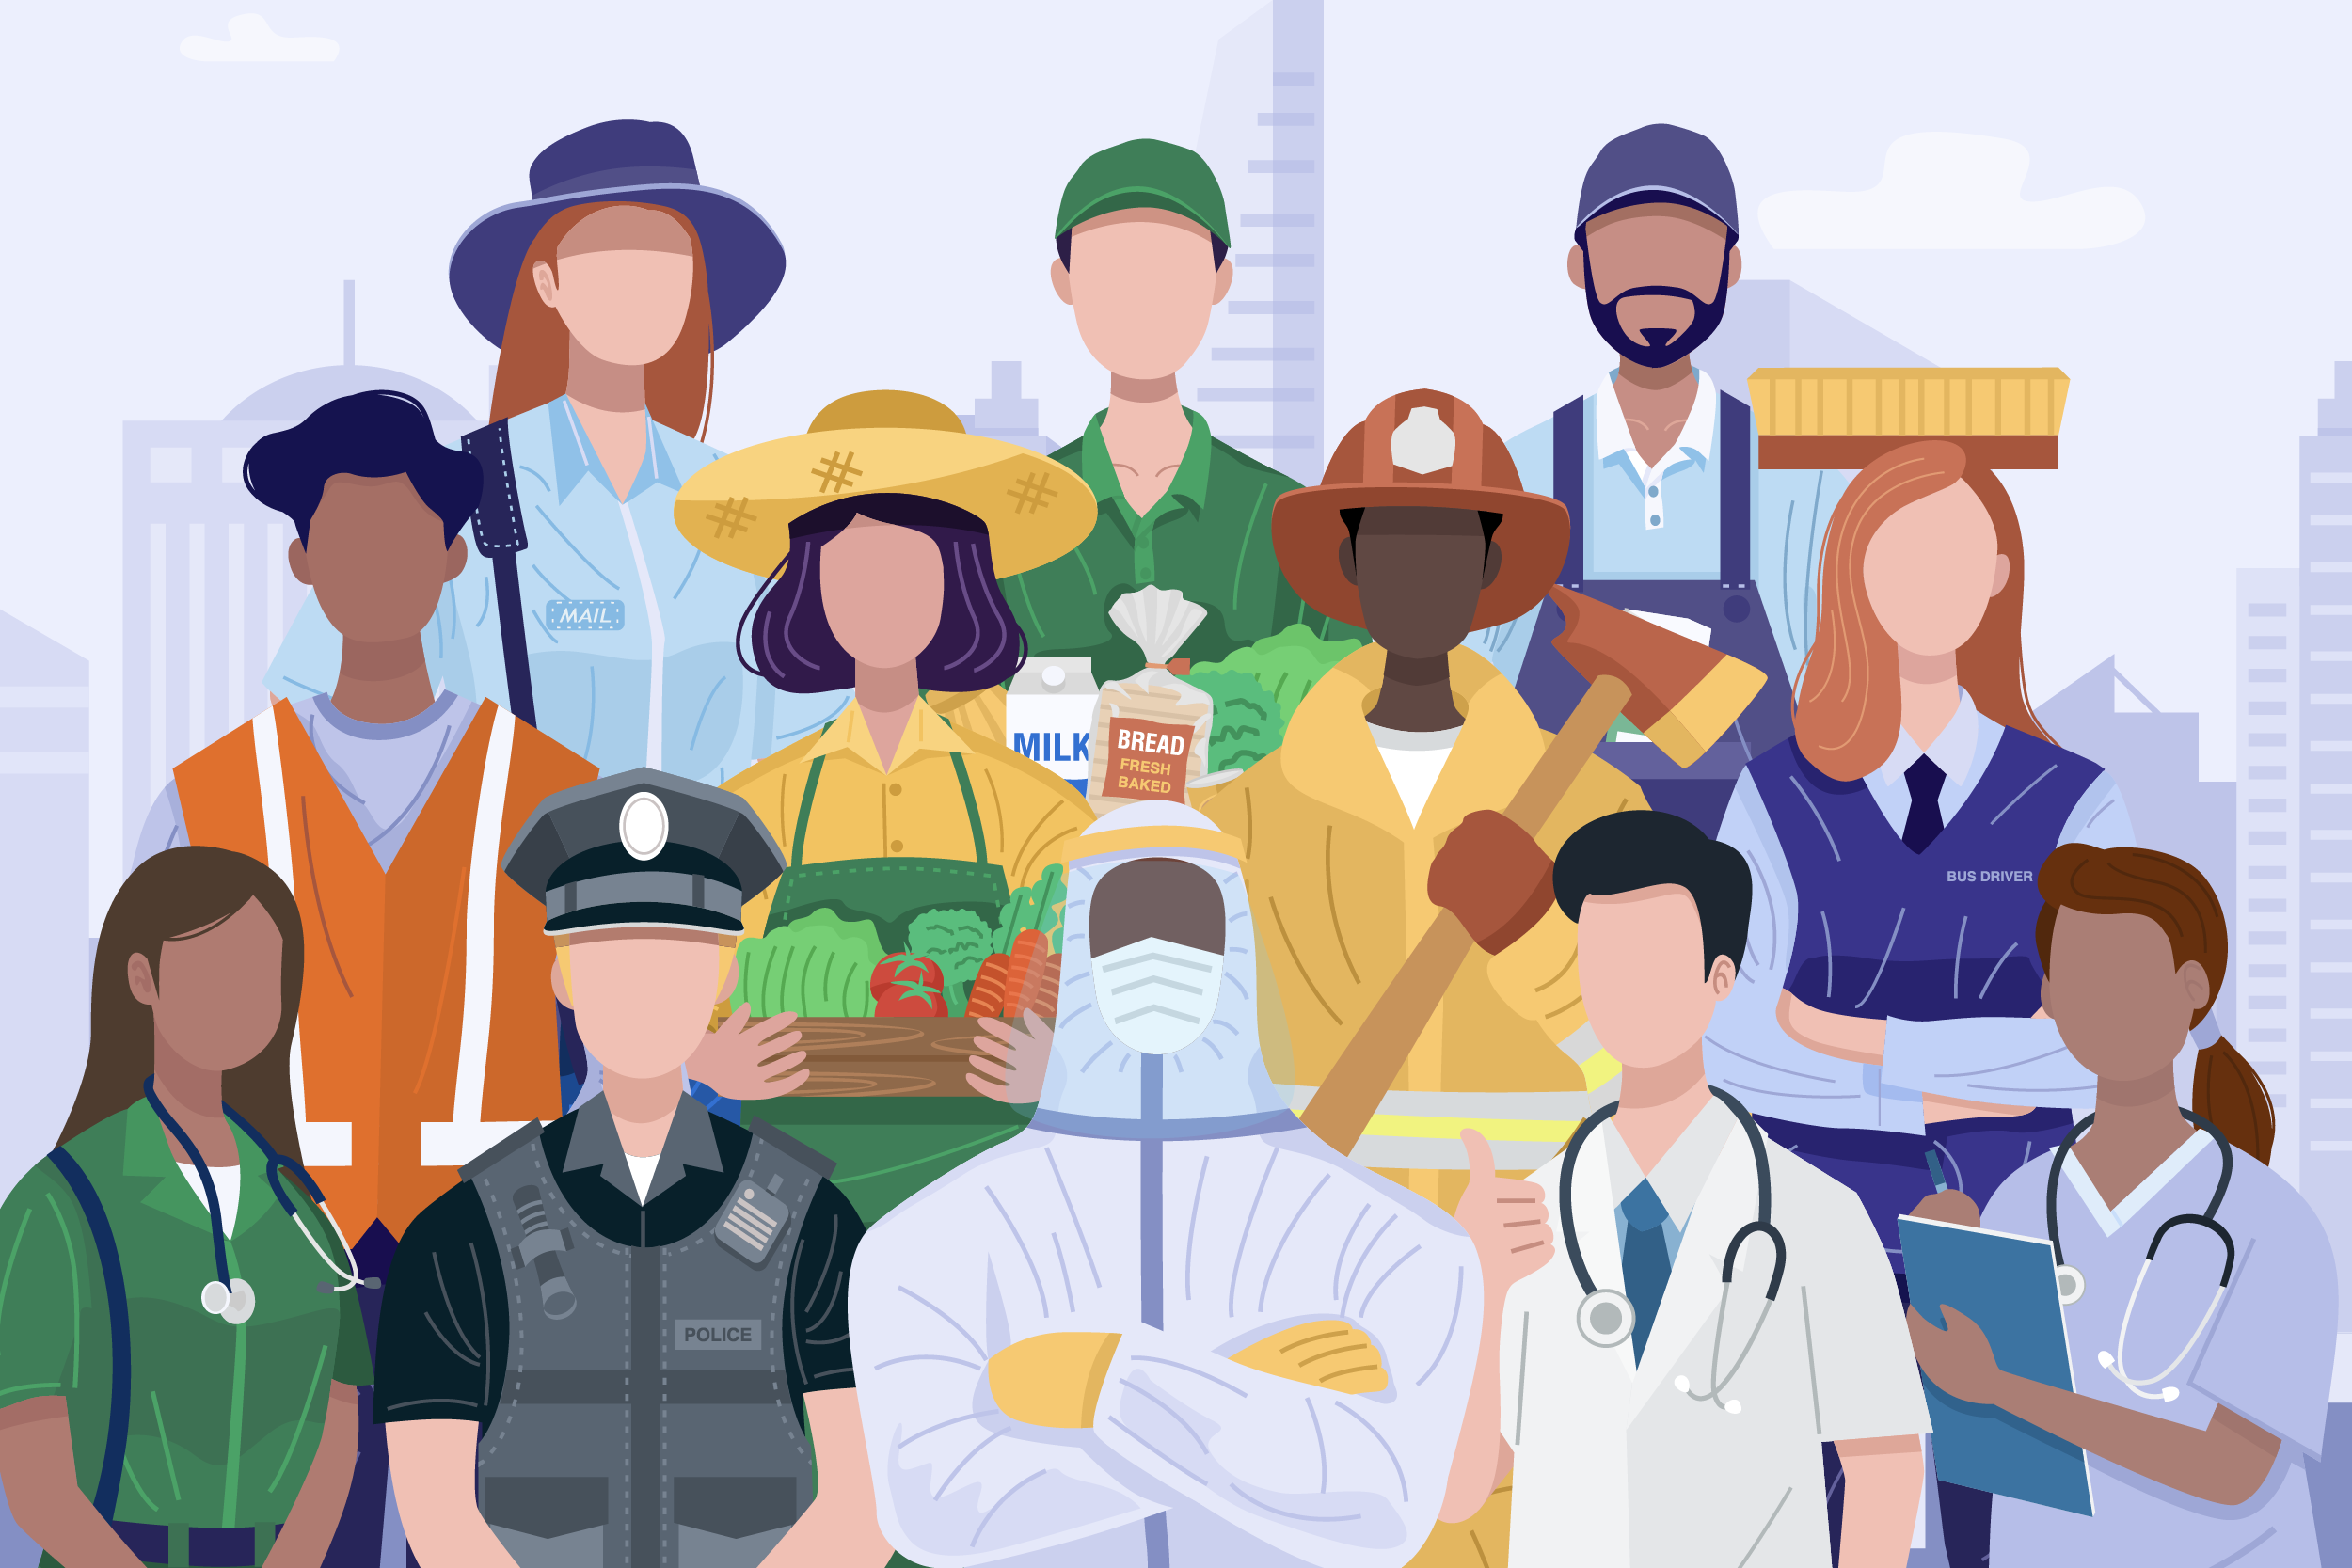 Graphic of a group of frontline workers including healthcare workers, policemen, construction workers, firemen, factory workers, etc